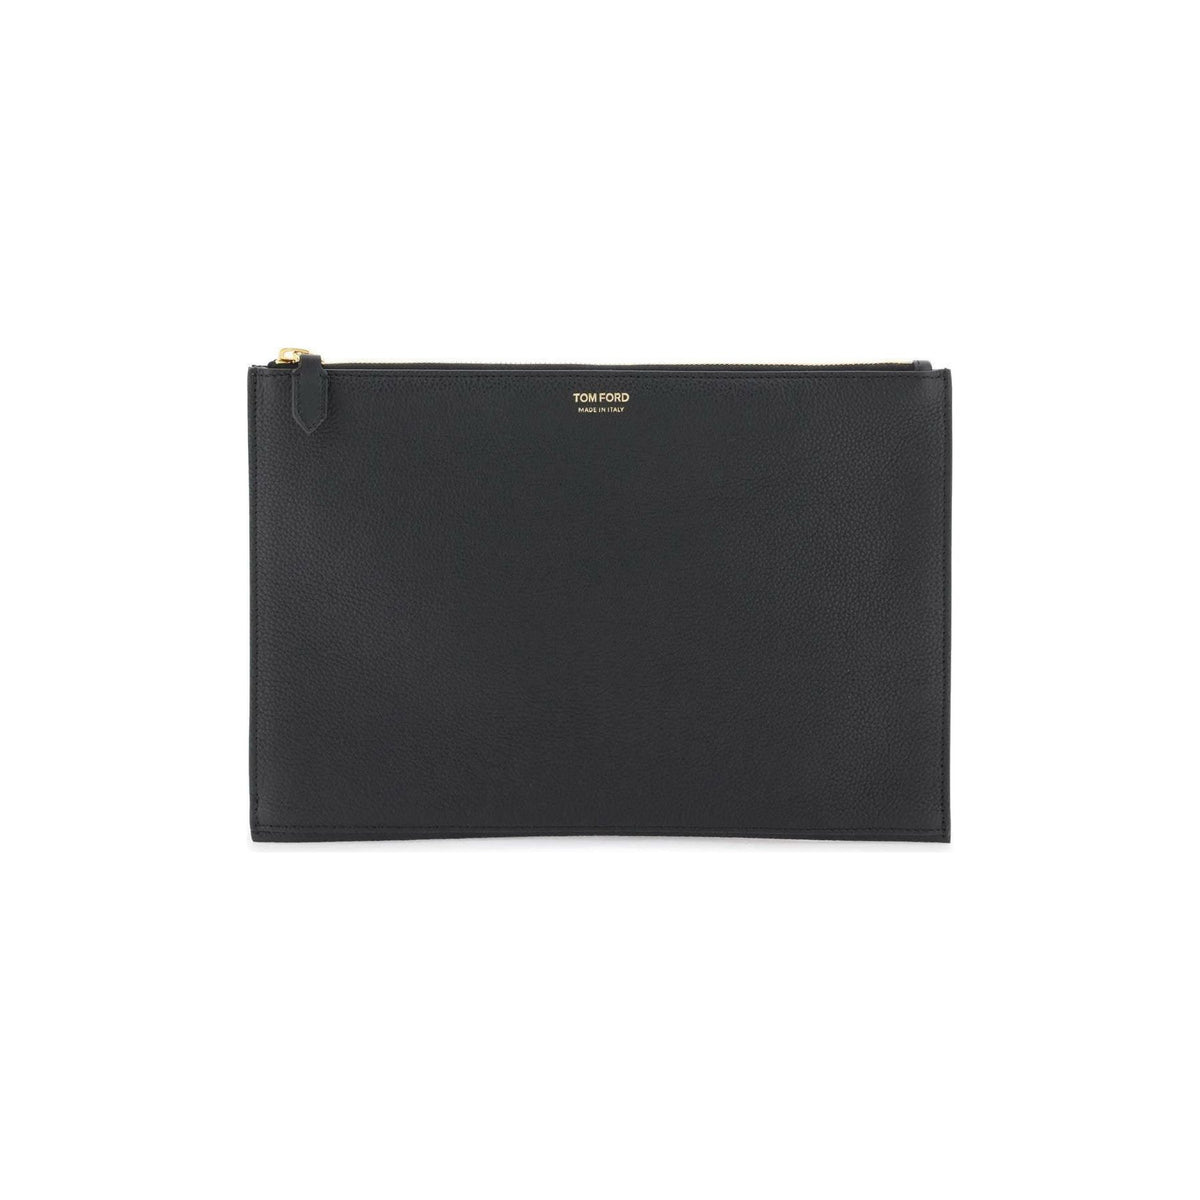 TOM FORD - Grained Leather Pouch - JOHN JULIA